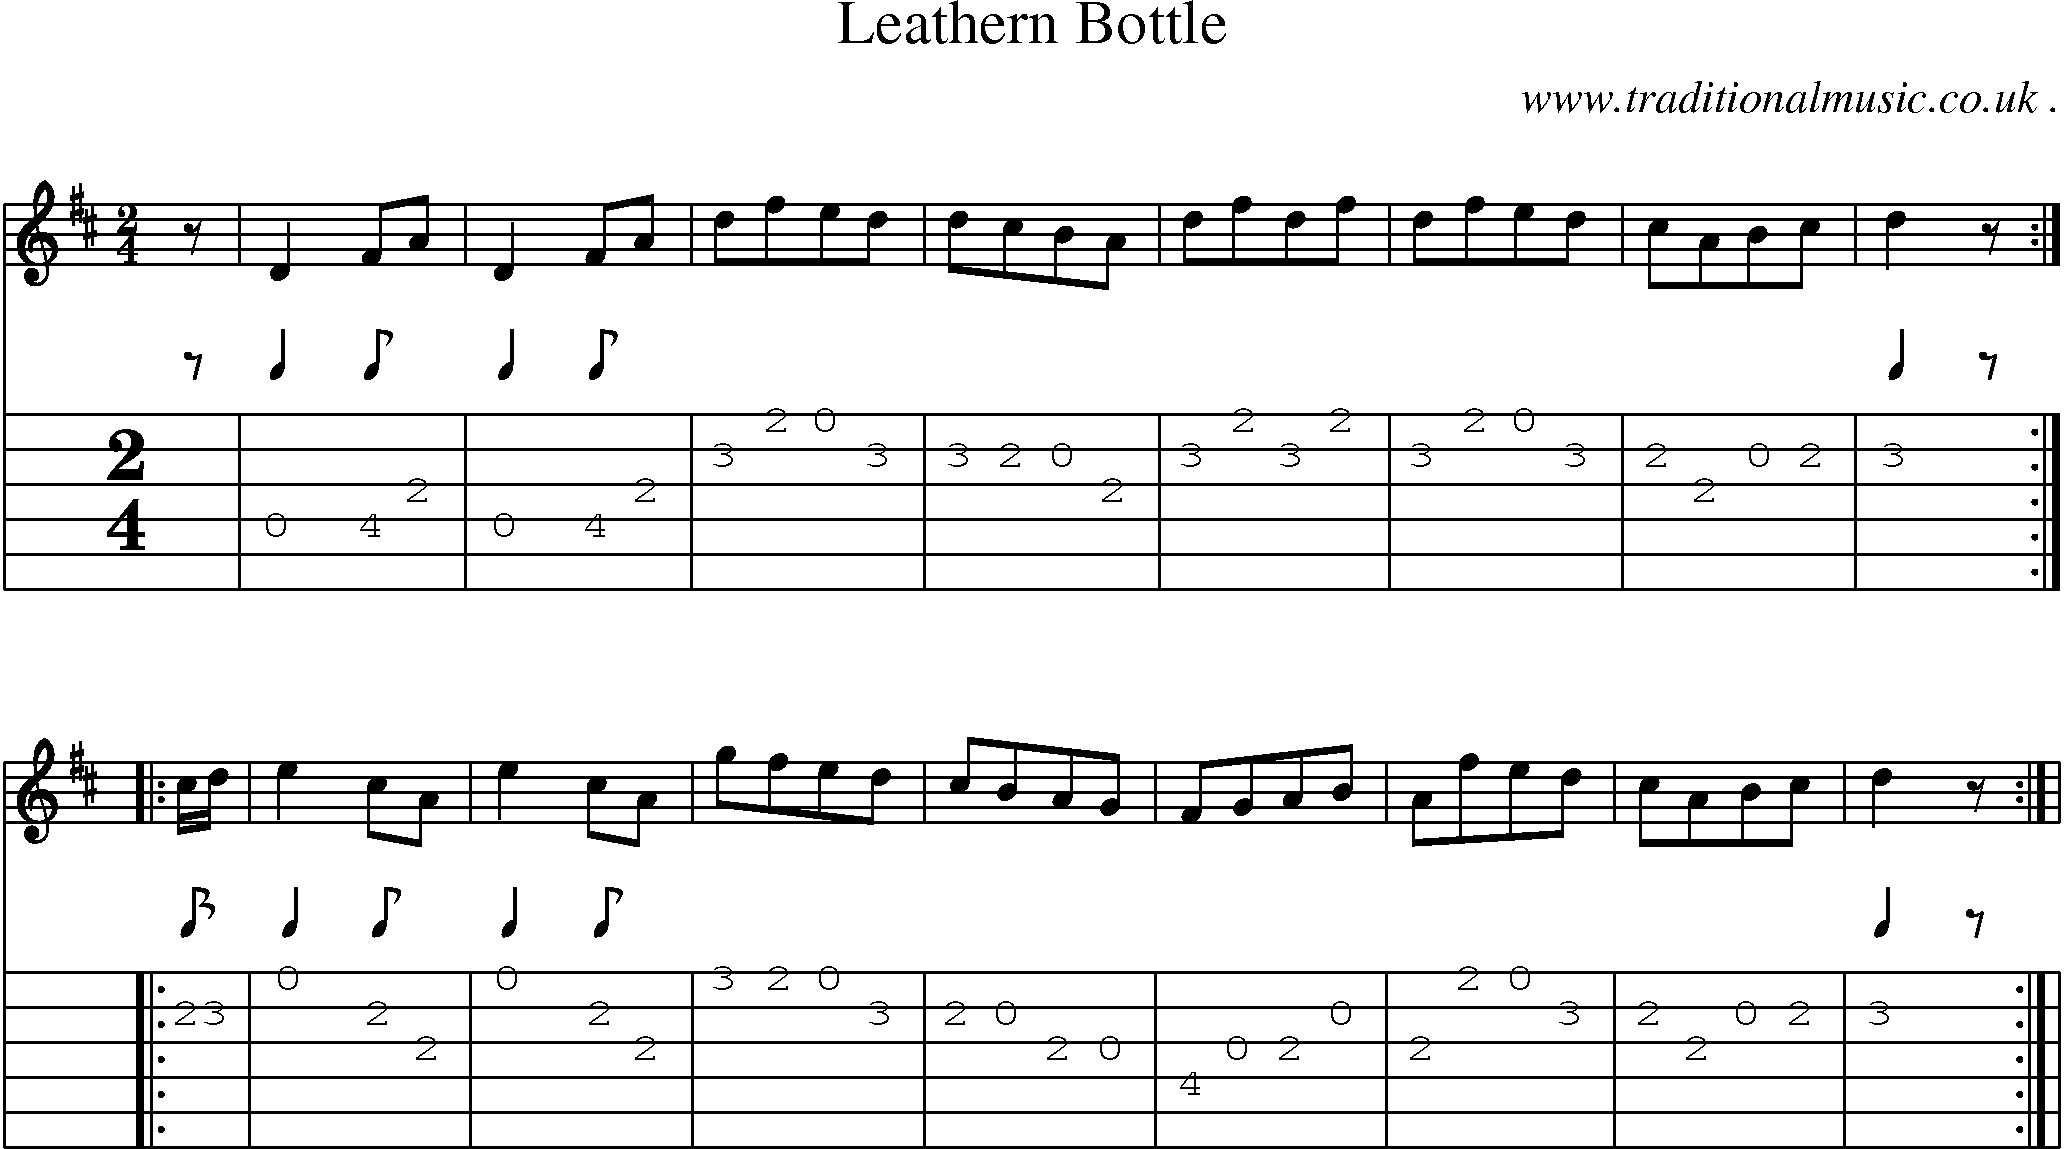 Sheet-Music and Guitar Tabs for Leathern Bottle